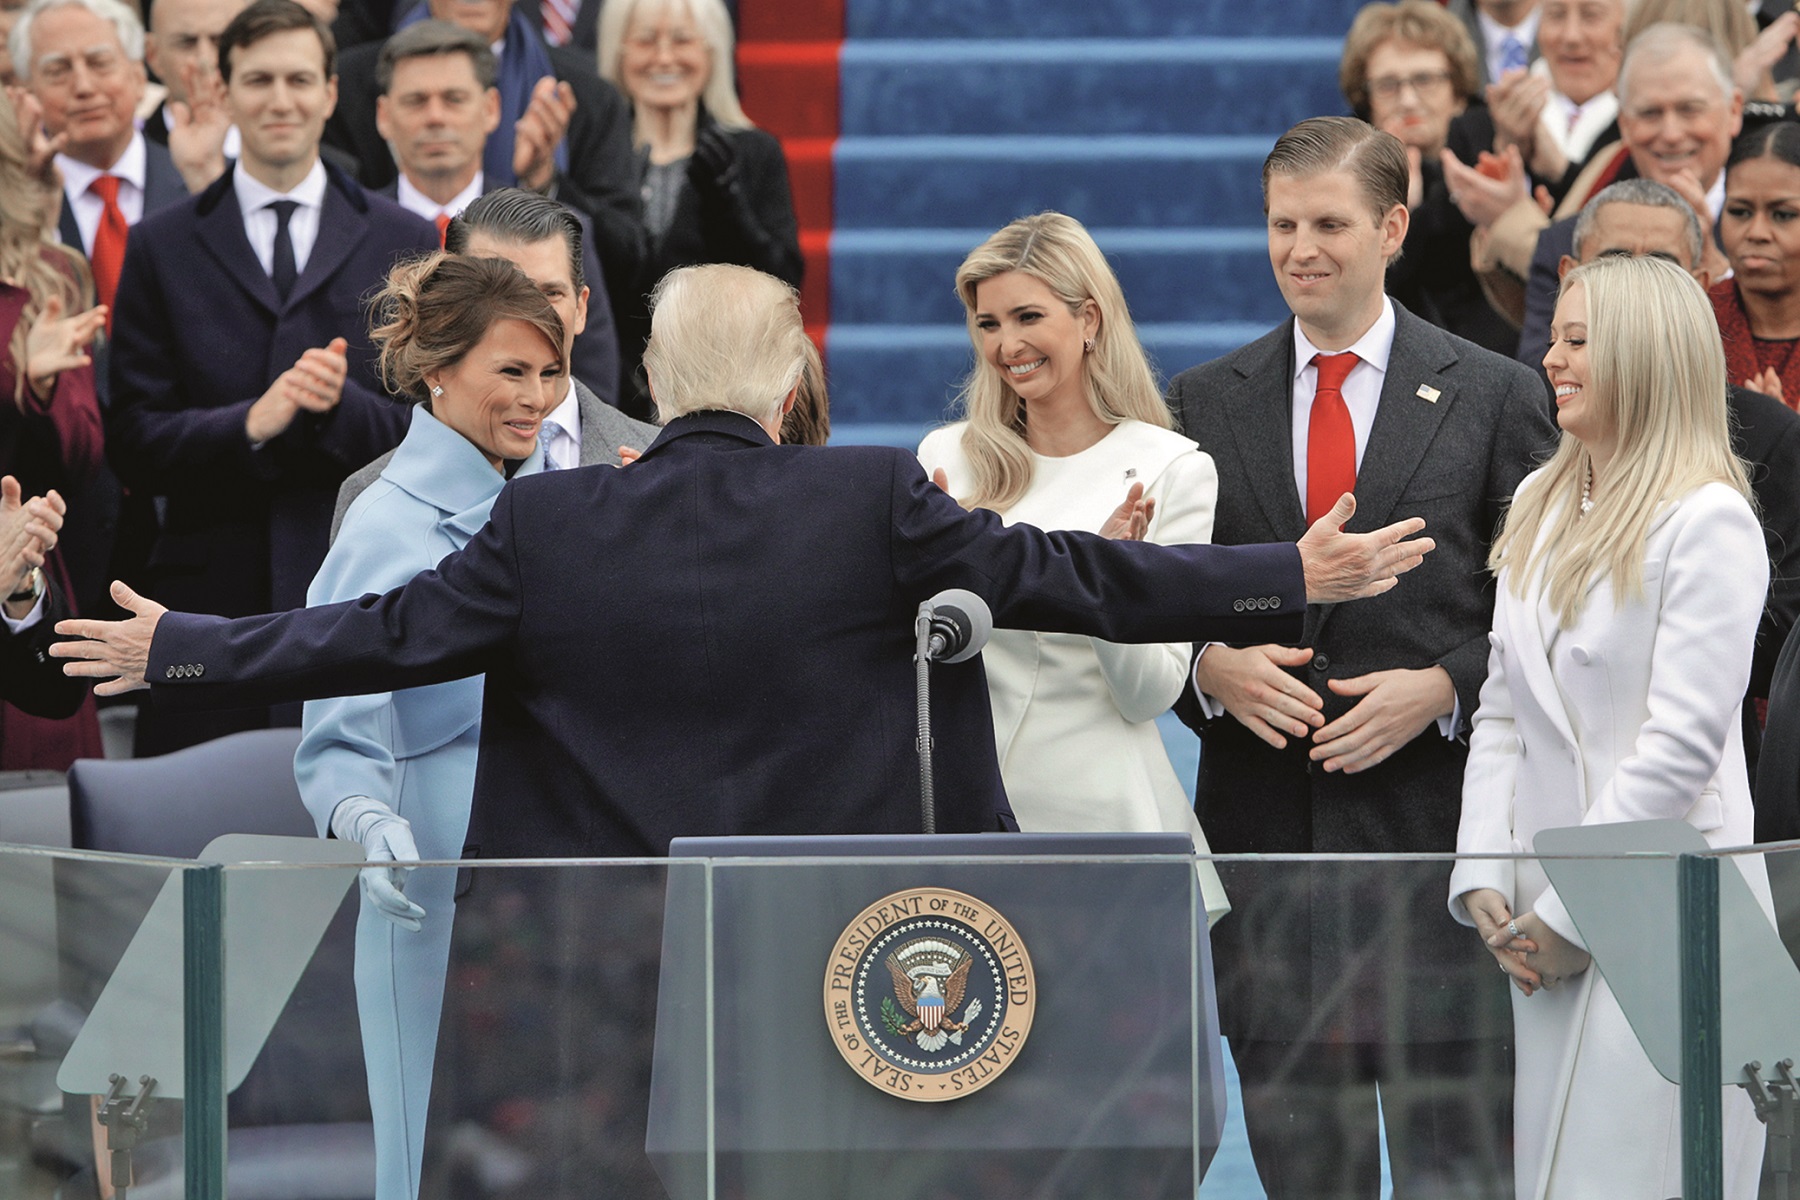 WASHINGTON, DC - JANUARY 20:  President Donald Trump reaches out to embrace son Barron Trump as  First Lady Melania Trump,  Ivanka Trump (C), Eric Trump and Tiffany Trump look on after his inauguration on the West Front of the U.S. Capitol on January 20, 2017 in Washington, DC. In today's inauguration ceremony Donald J. Trump becomes the 45th president of the United States.  (Photo by Alex Wong/Getty Images)